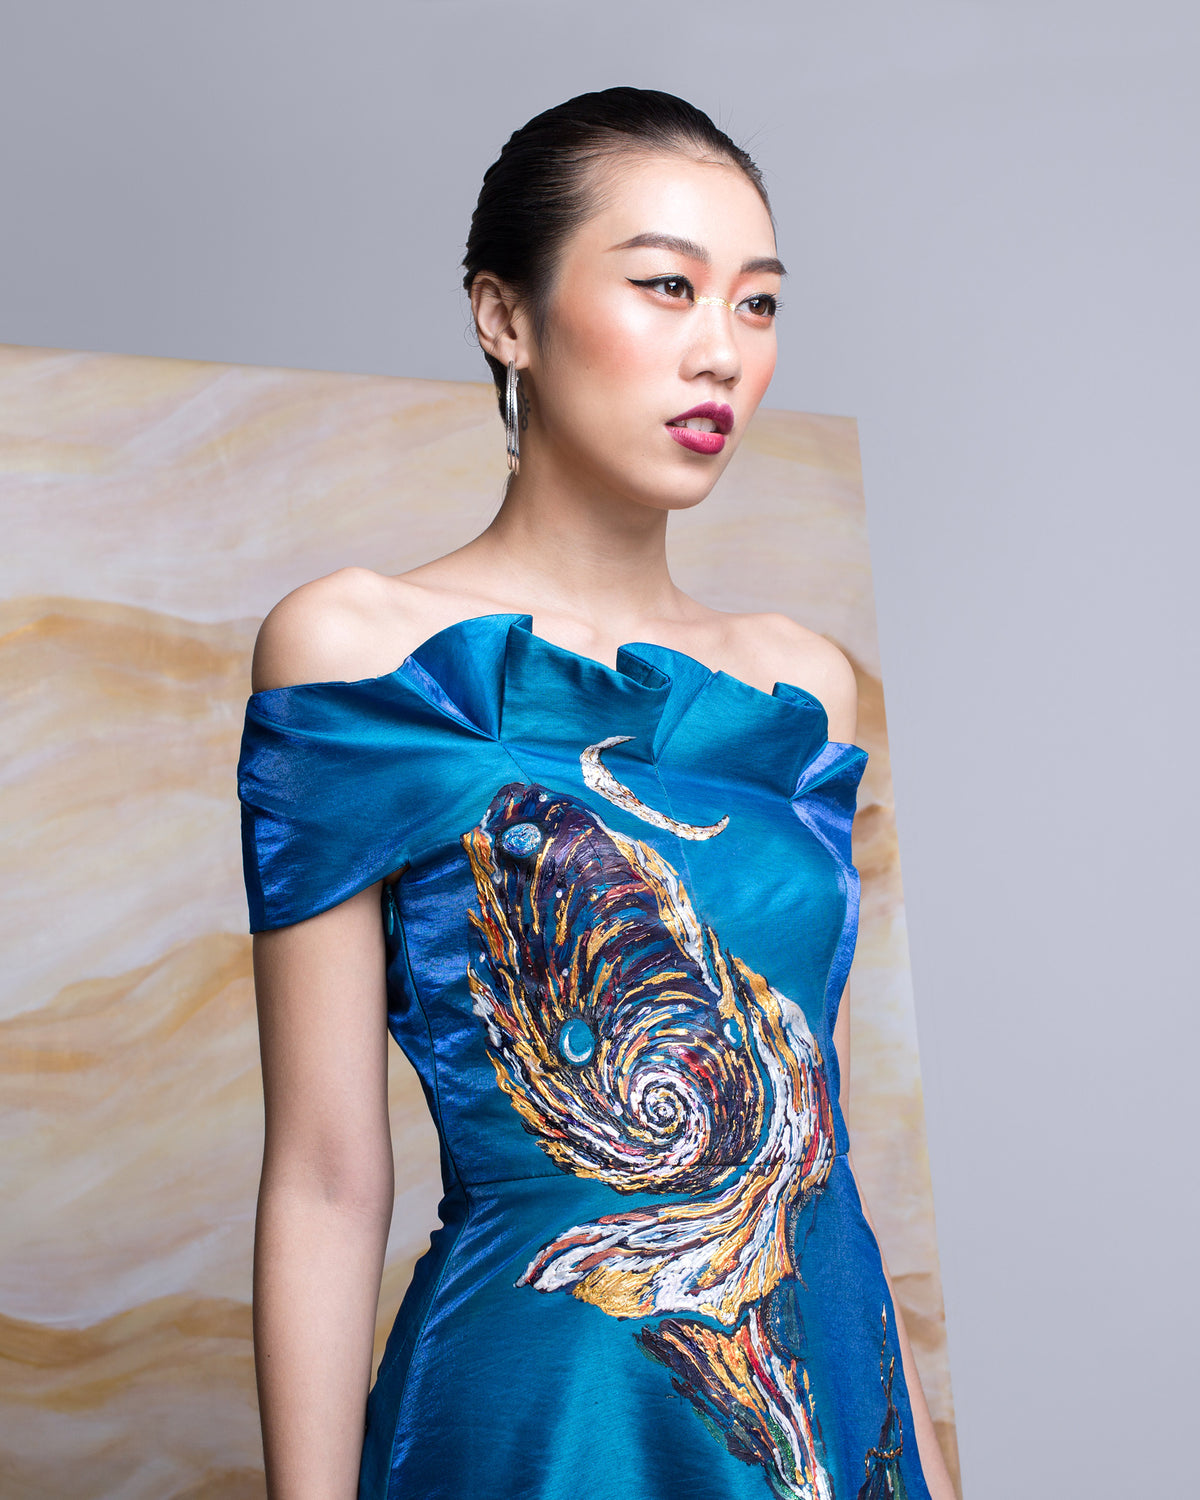 Lily-painted Off-the-Shoulder Gown Dress